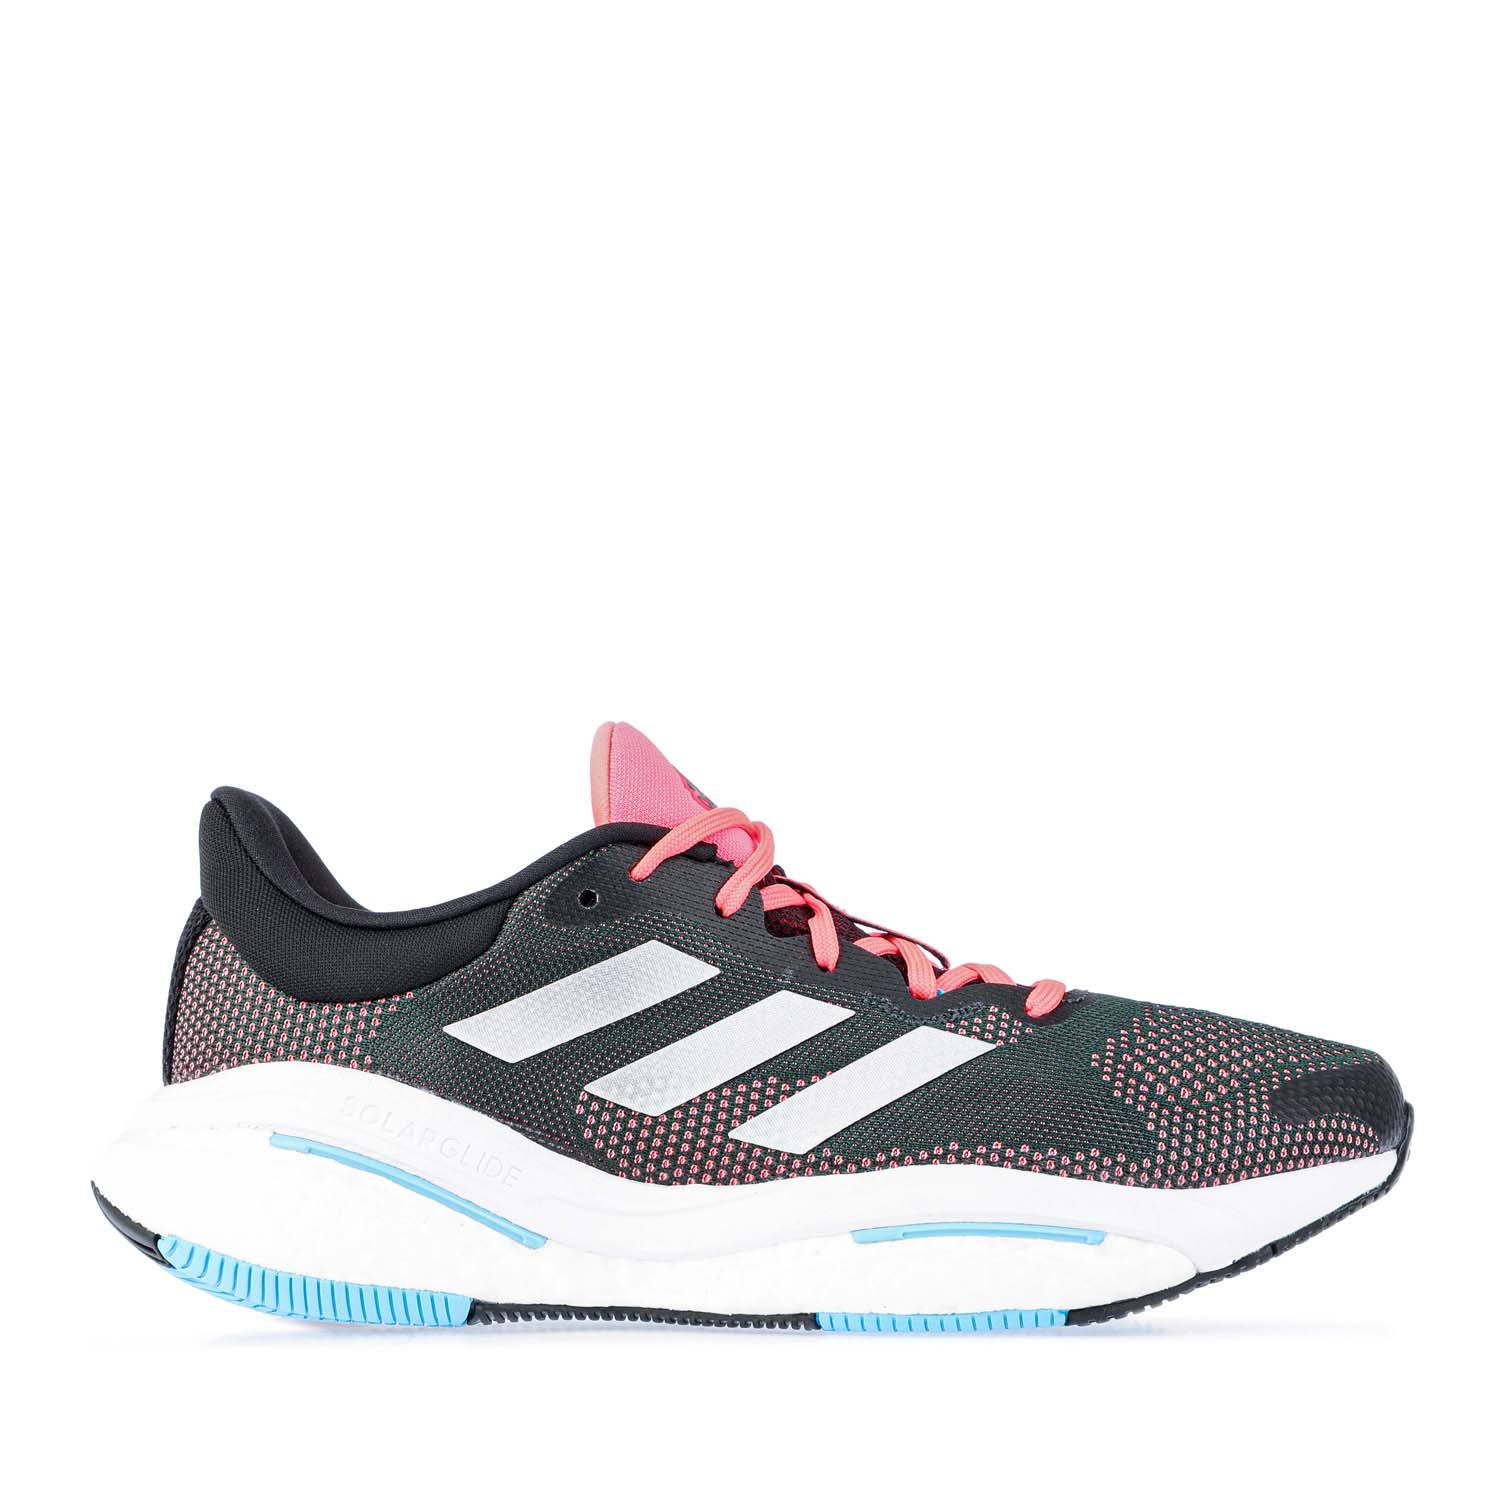 Mens Solarglide 5 Running Shoes